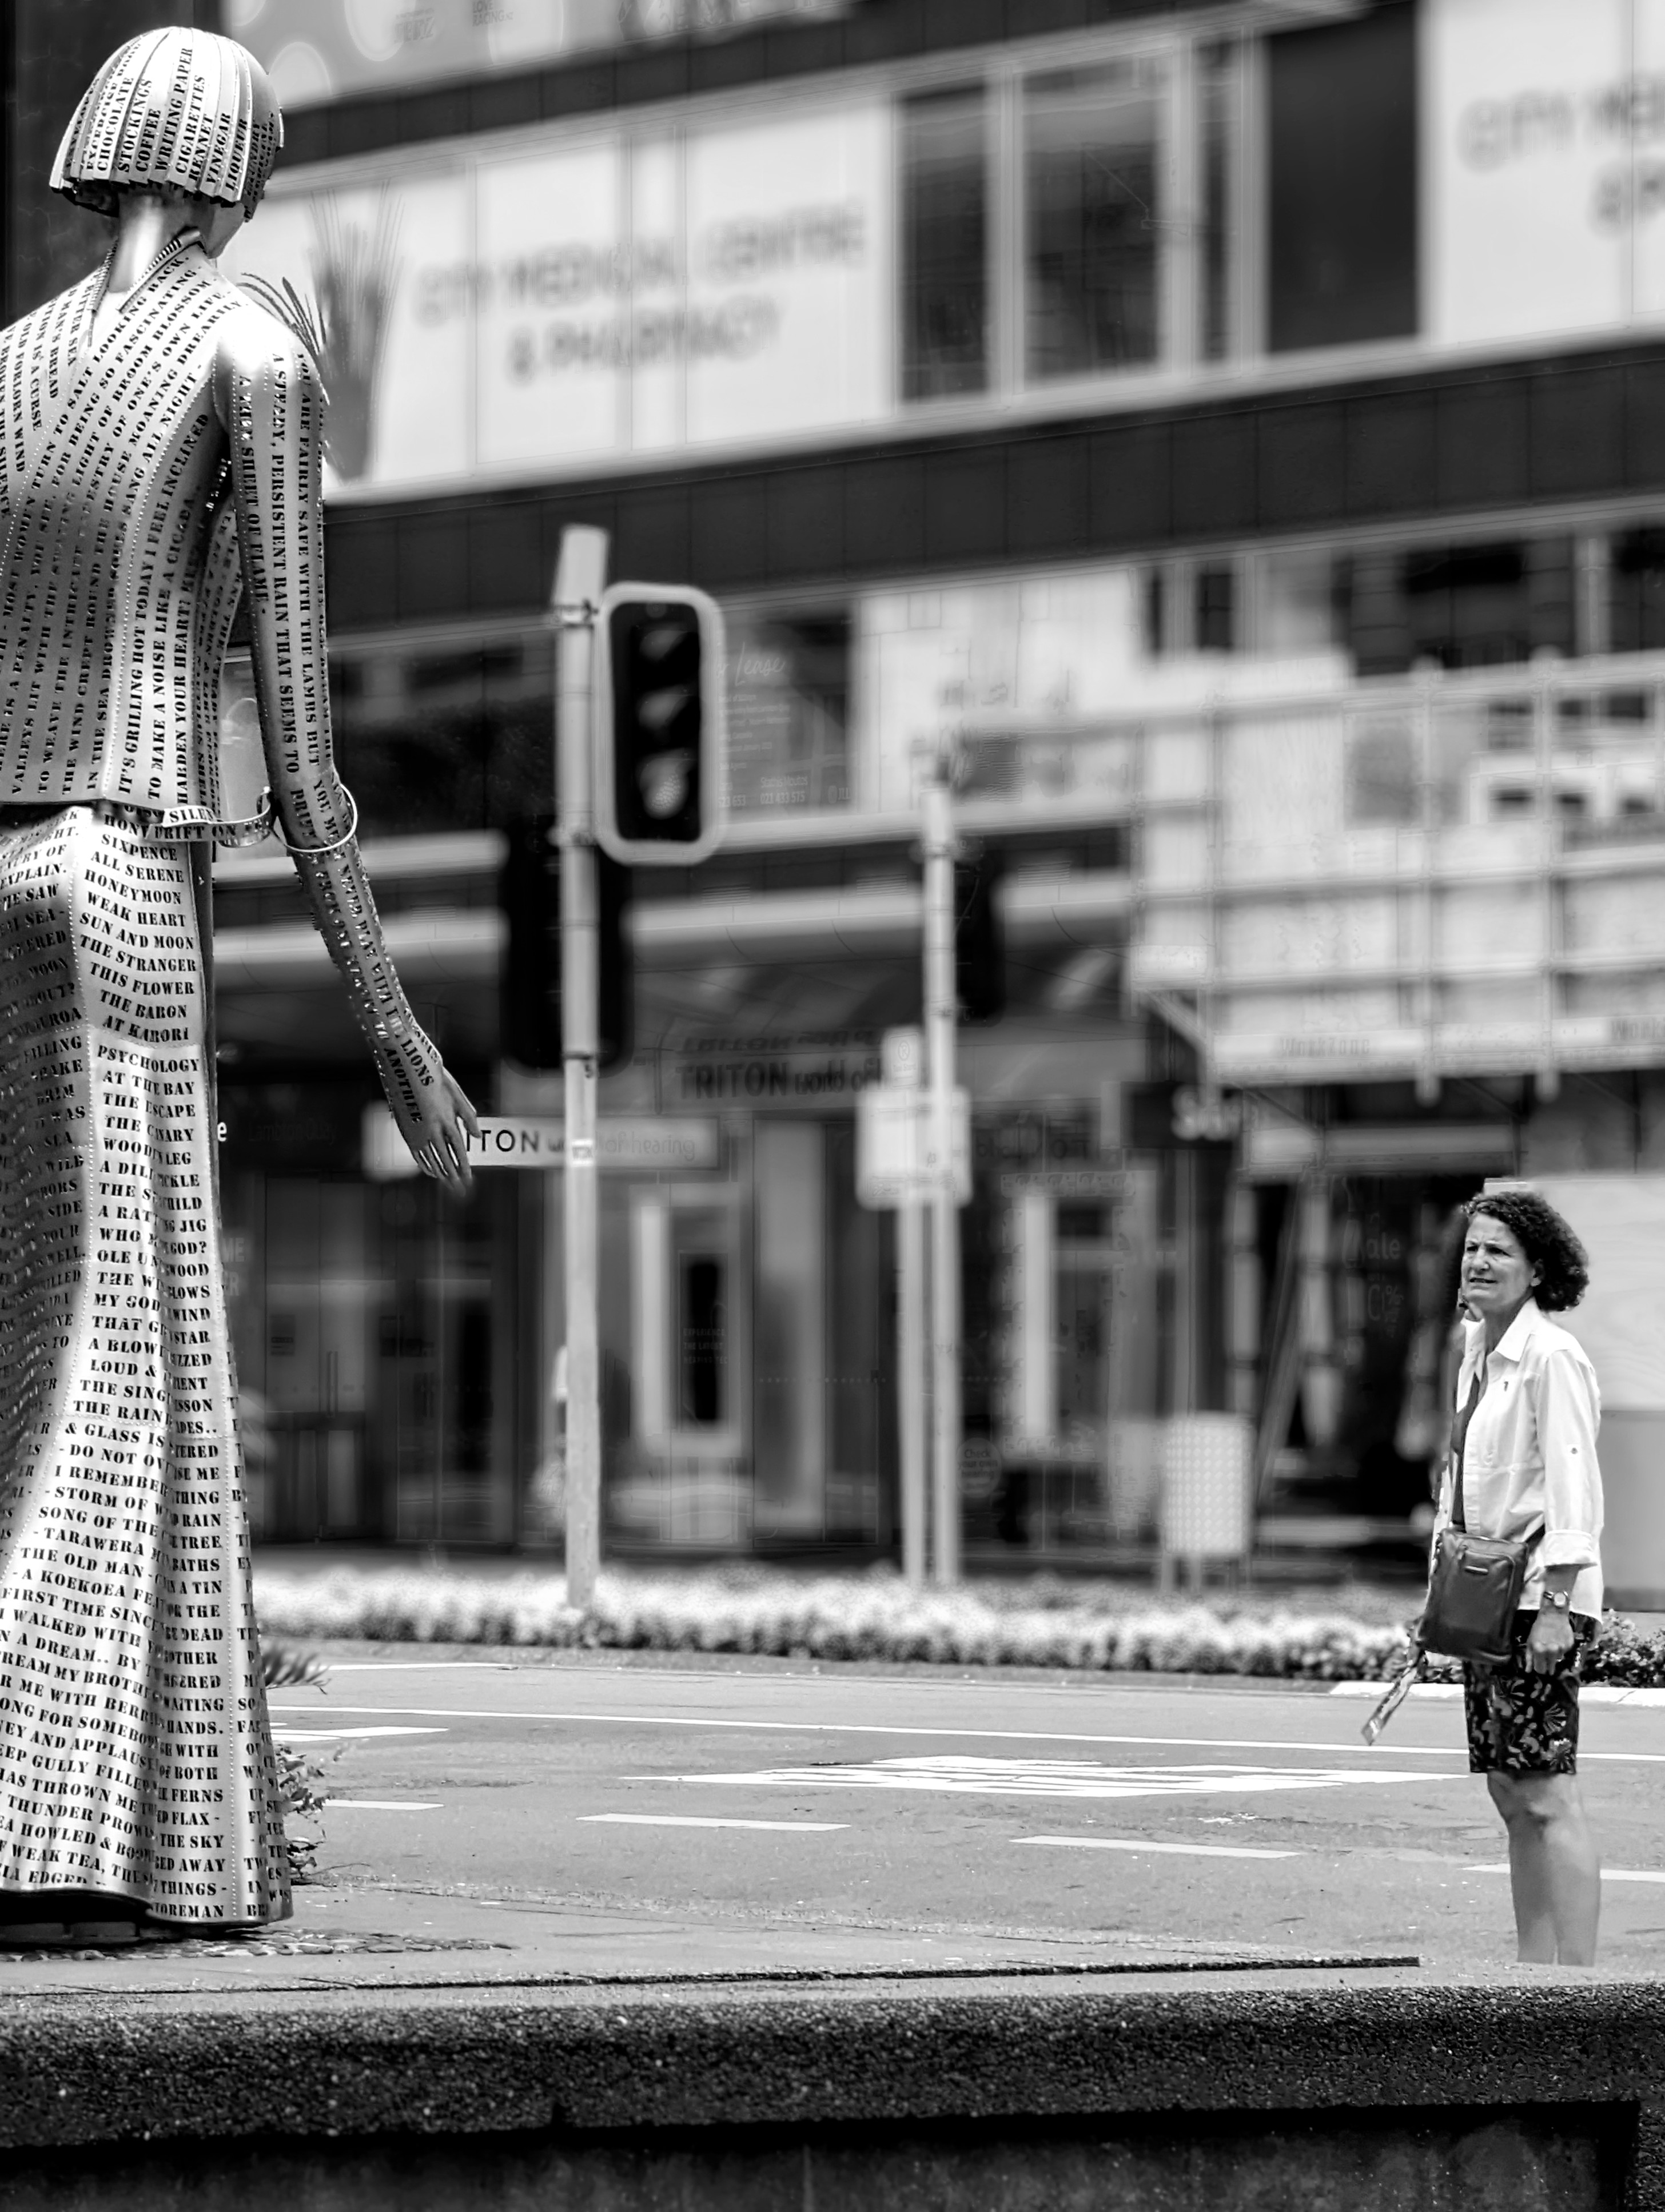 Edited version of a photo of a woman on a busy Wellington shopping street looks at the Katherine Mansfield statue. The photo is now black and white, people have been removed except the woman, and the background is blurred.